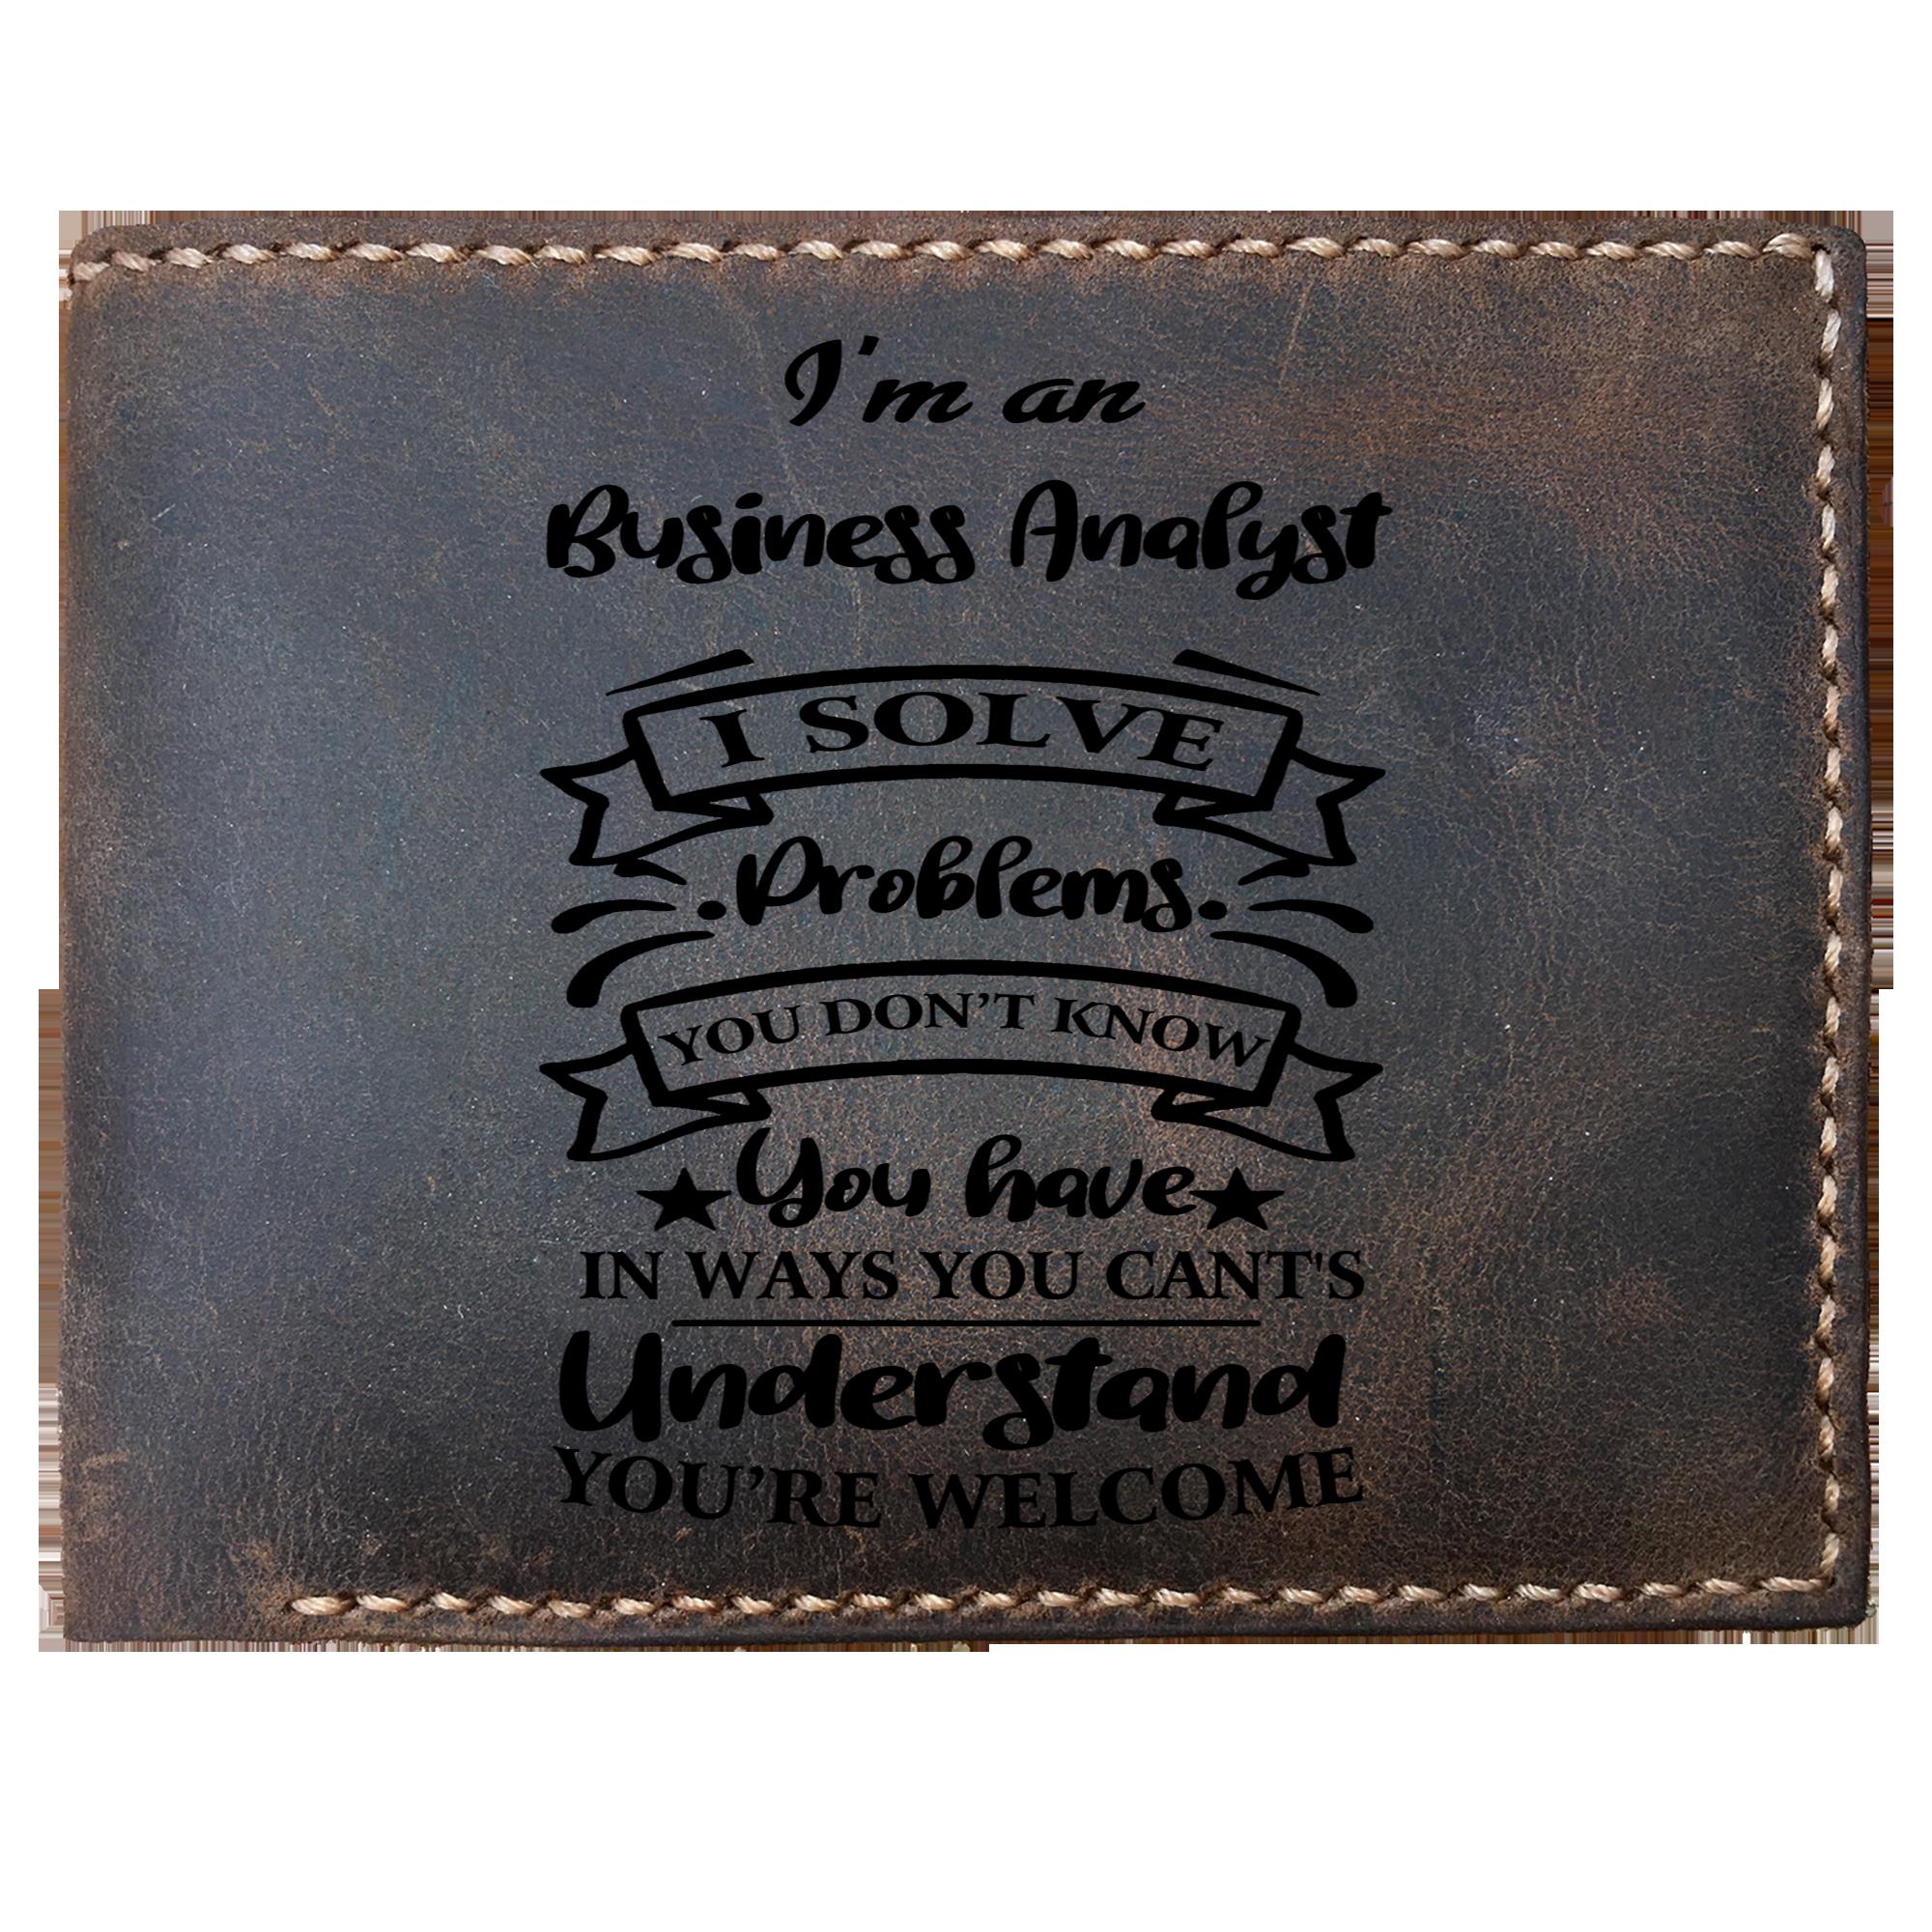 Skitongifts Funny Custom Laser Engraved Bifold Leather Wallet For Men, I'm an Business Analyst Solve Problems, Father's Day Gifts